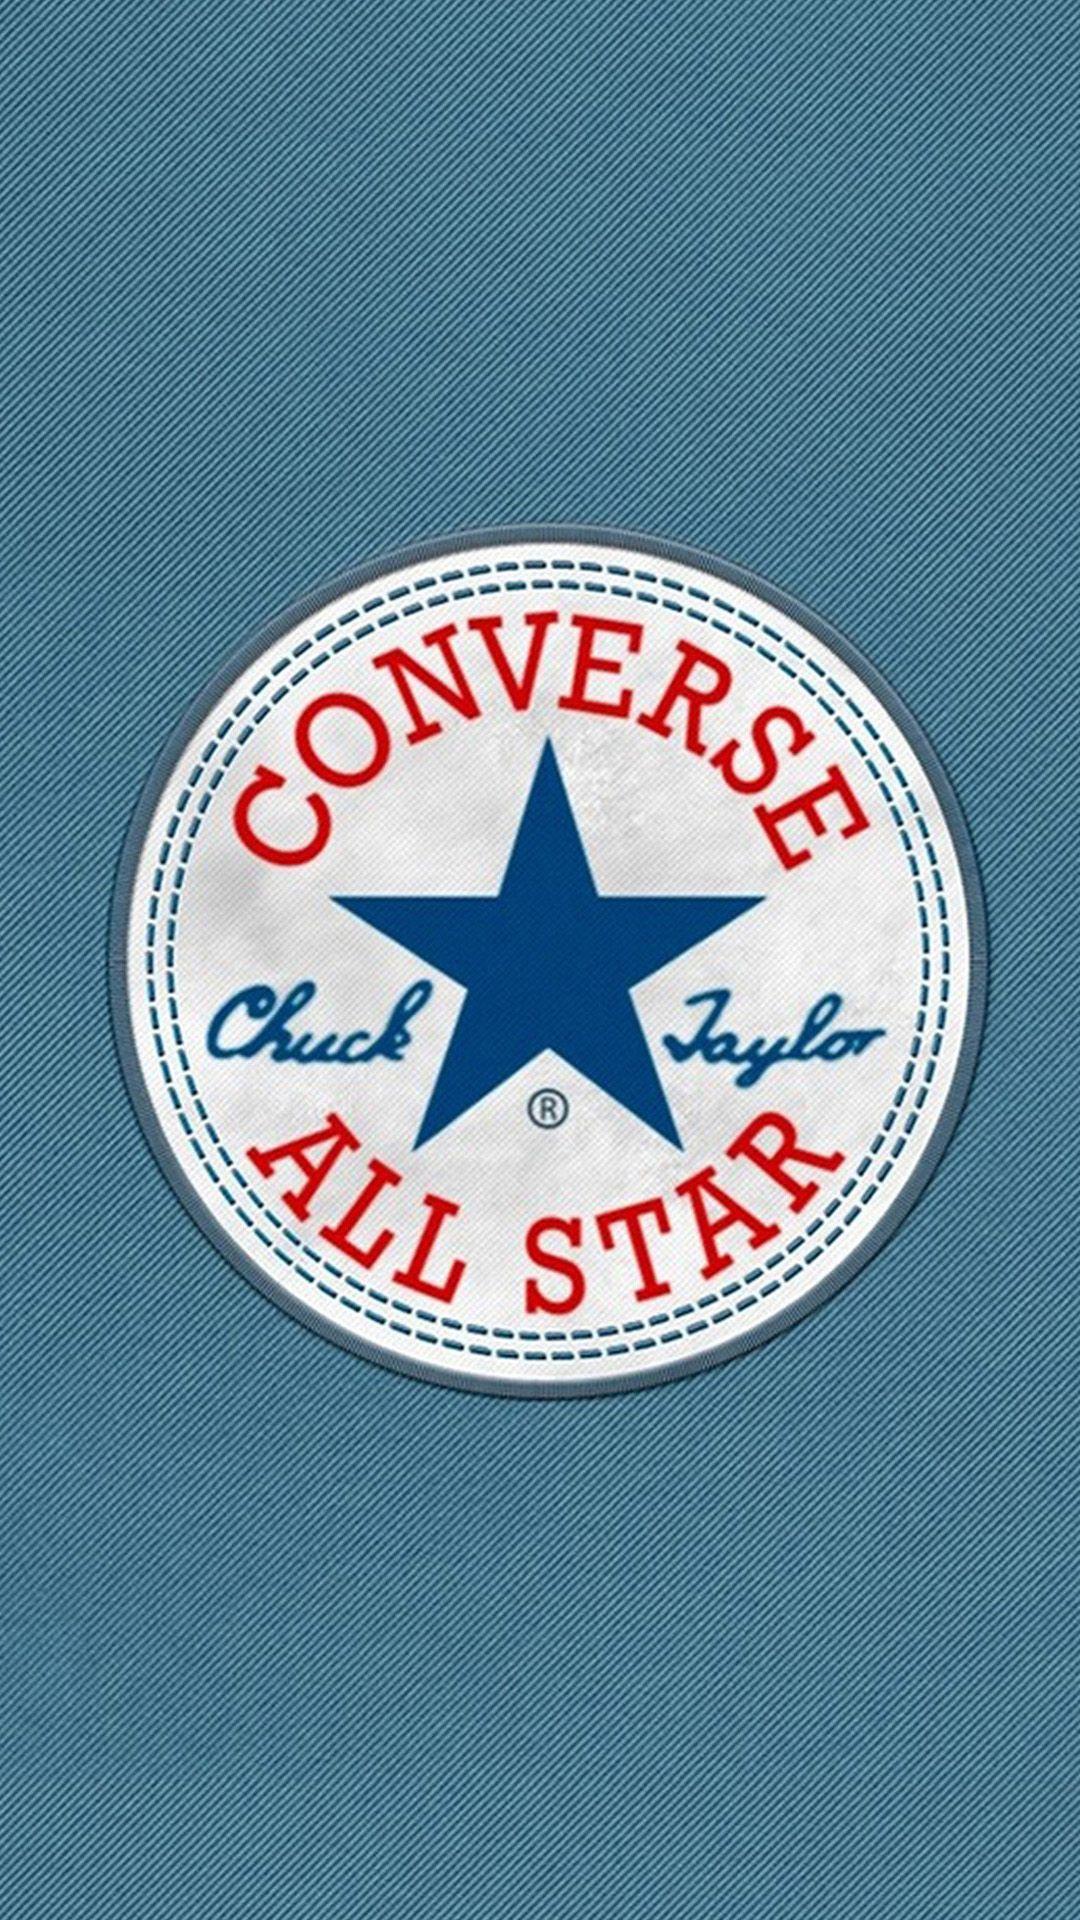 Converse All Star Blue Logo Android Wallpaper free download